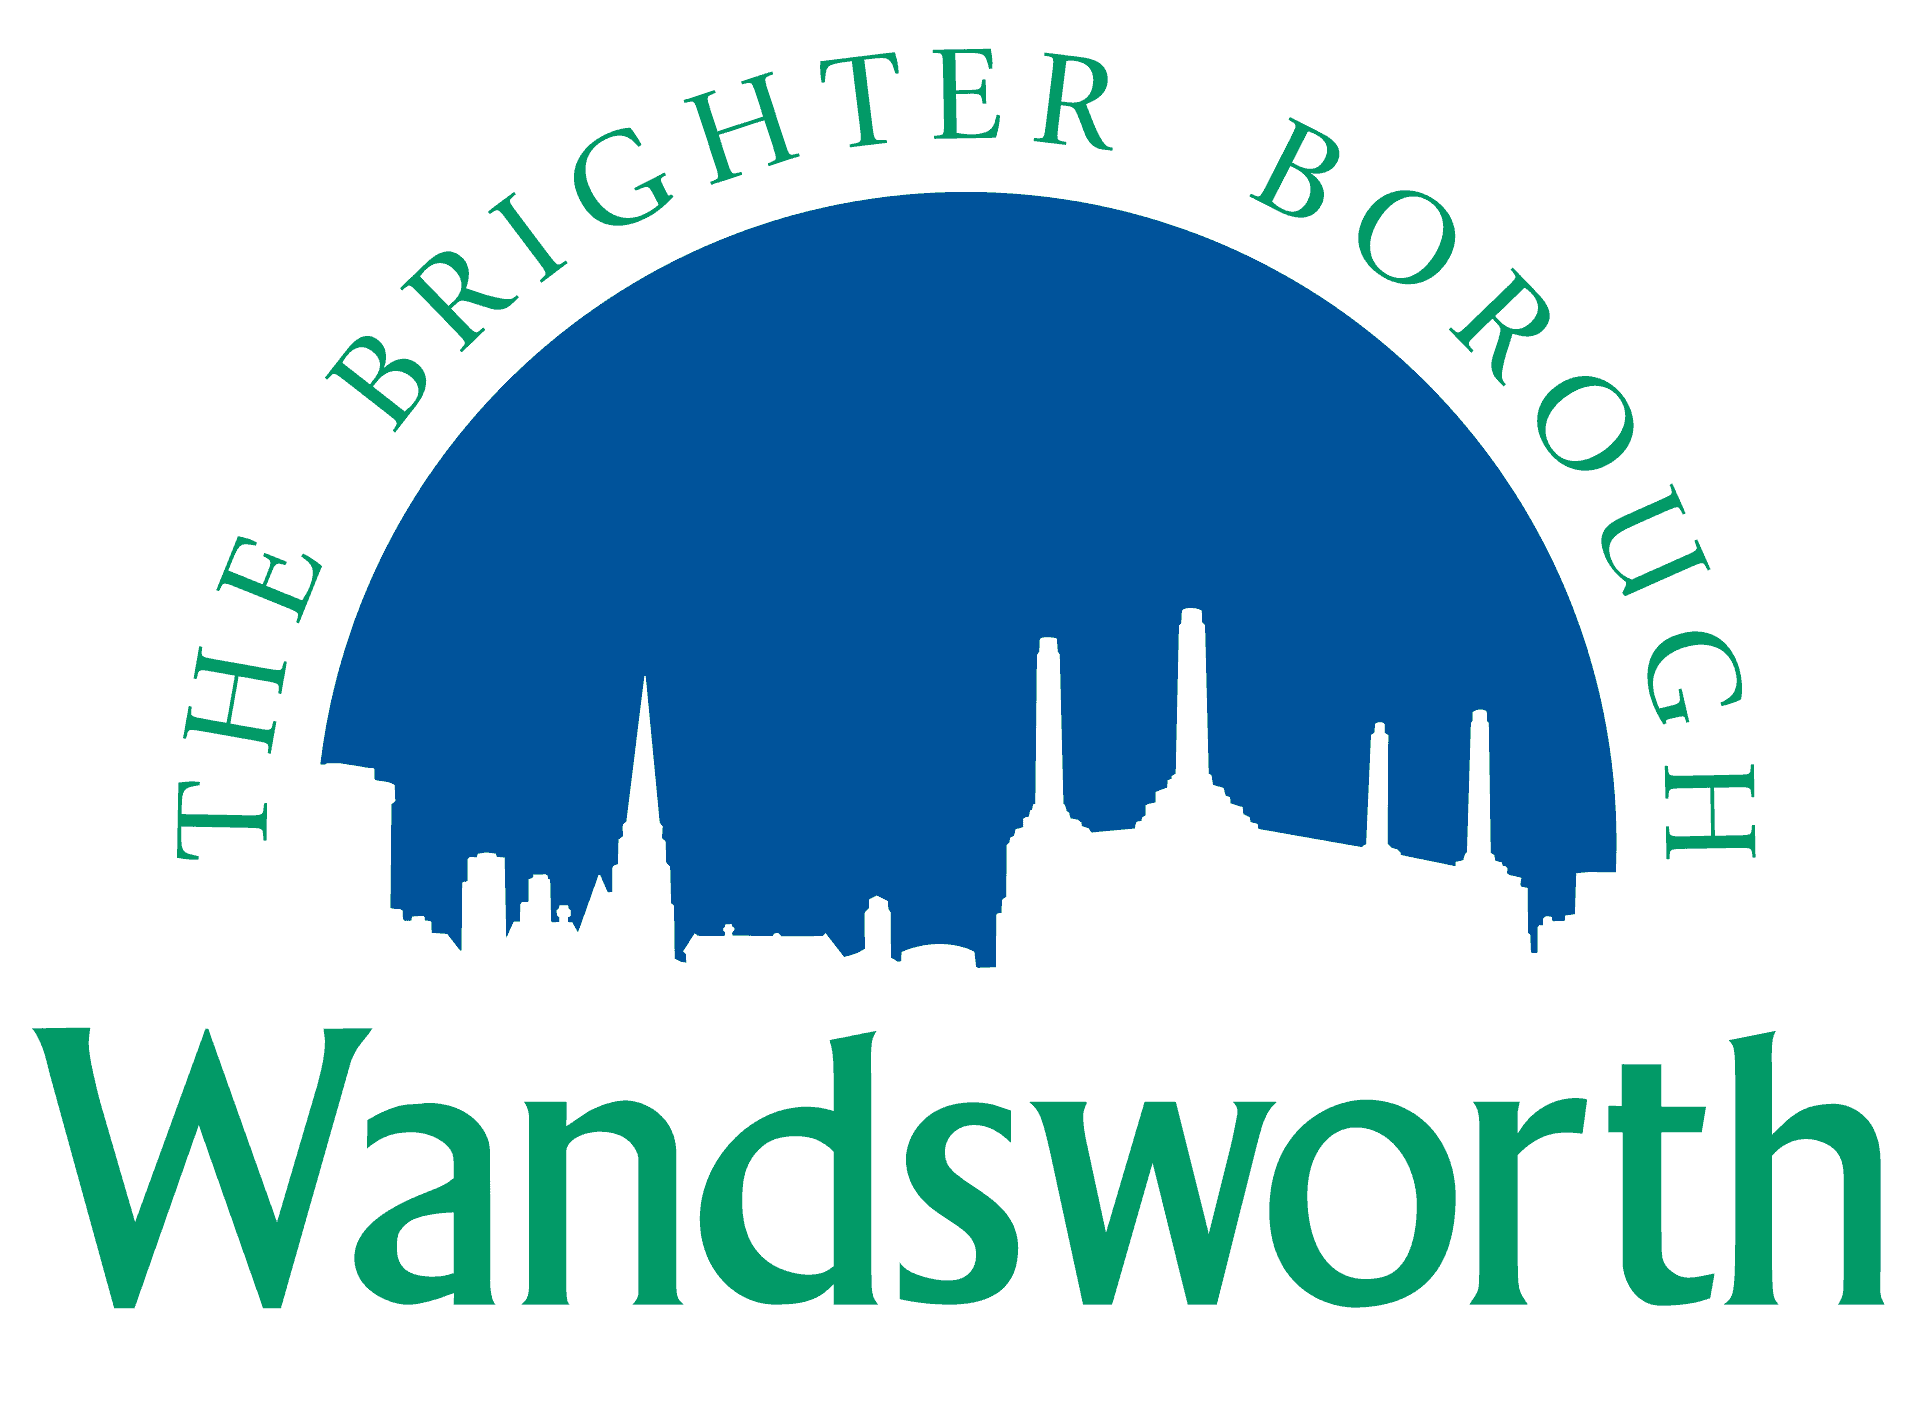 http://blue%20sky%20of%20wandsworth